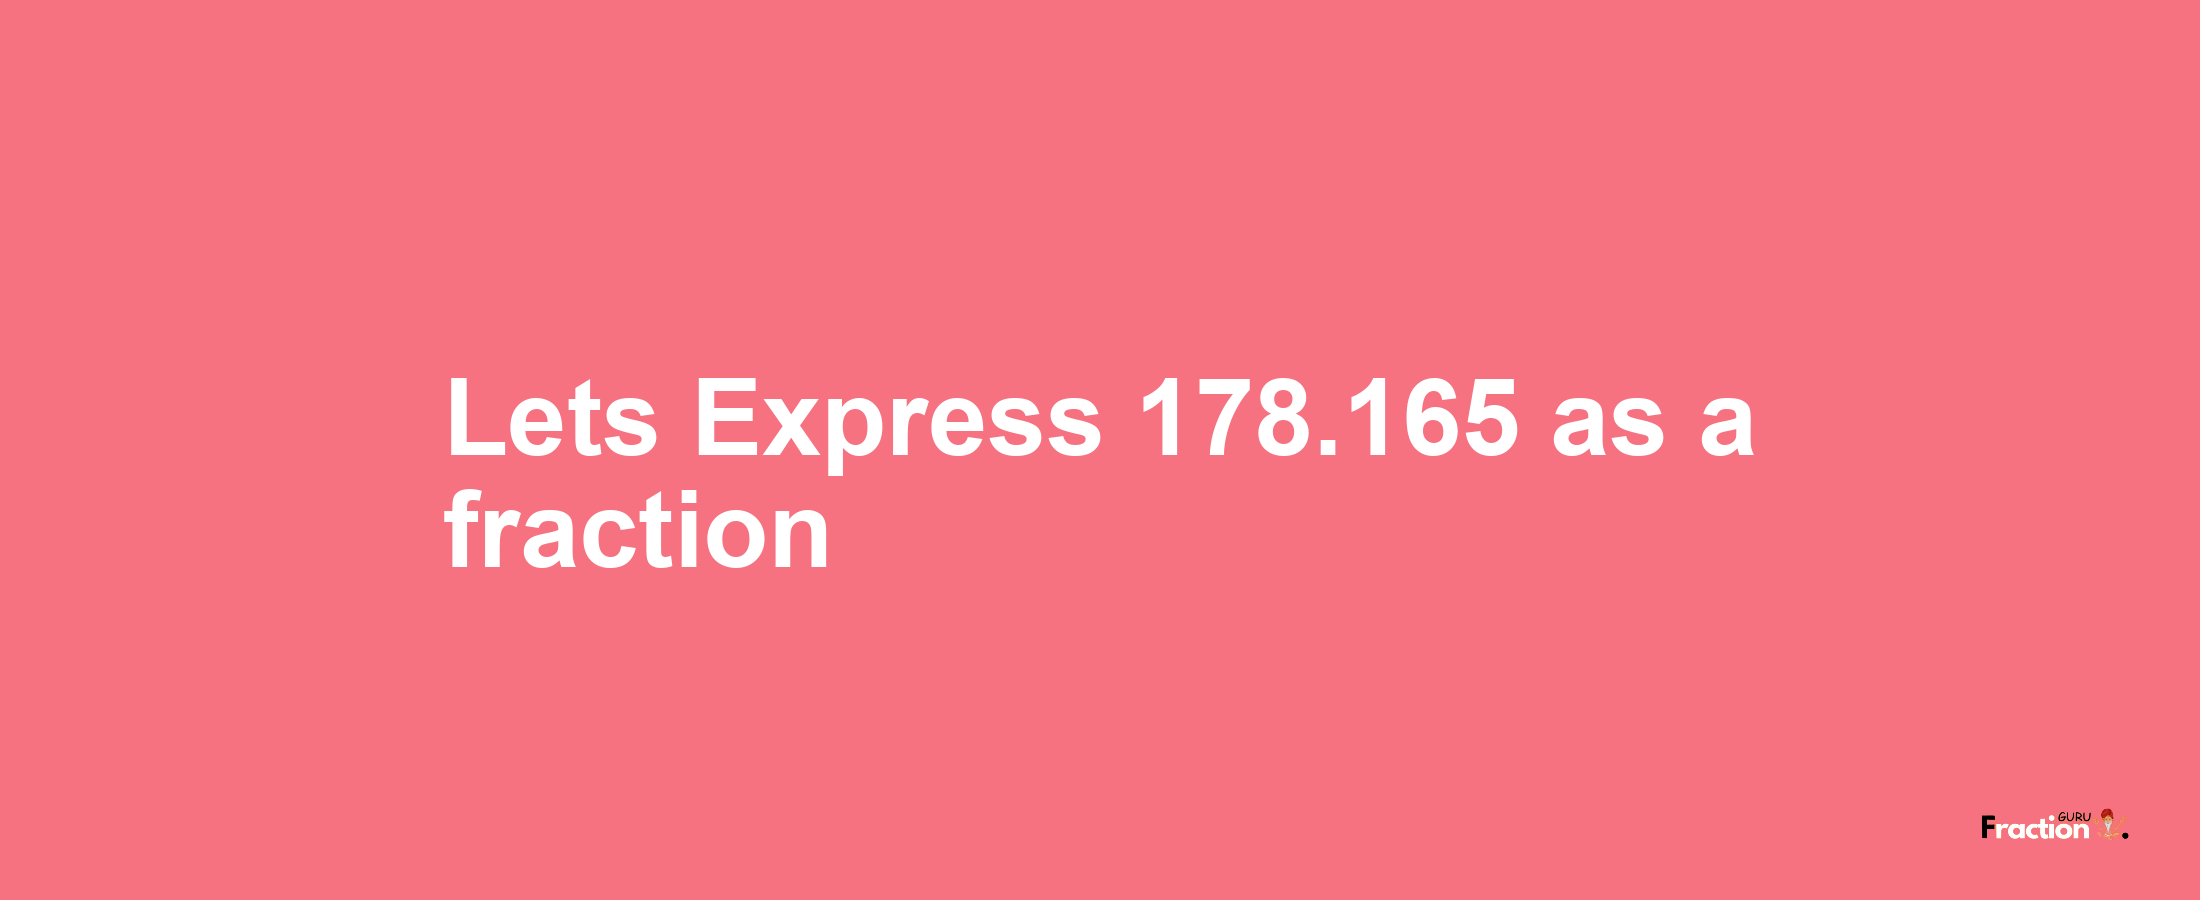 Lets Express 178.165 as afraction